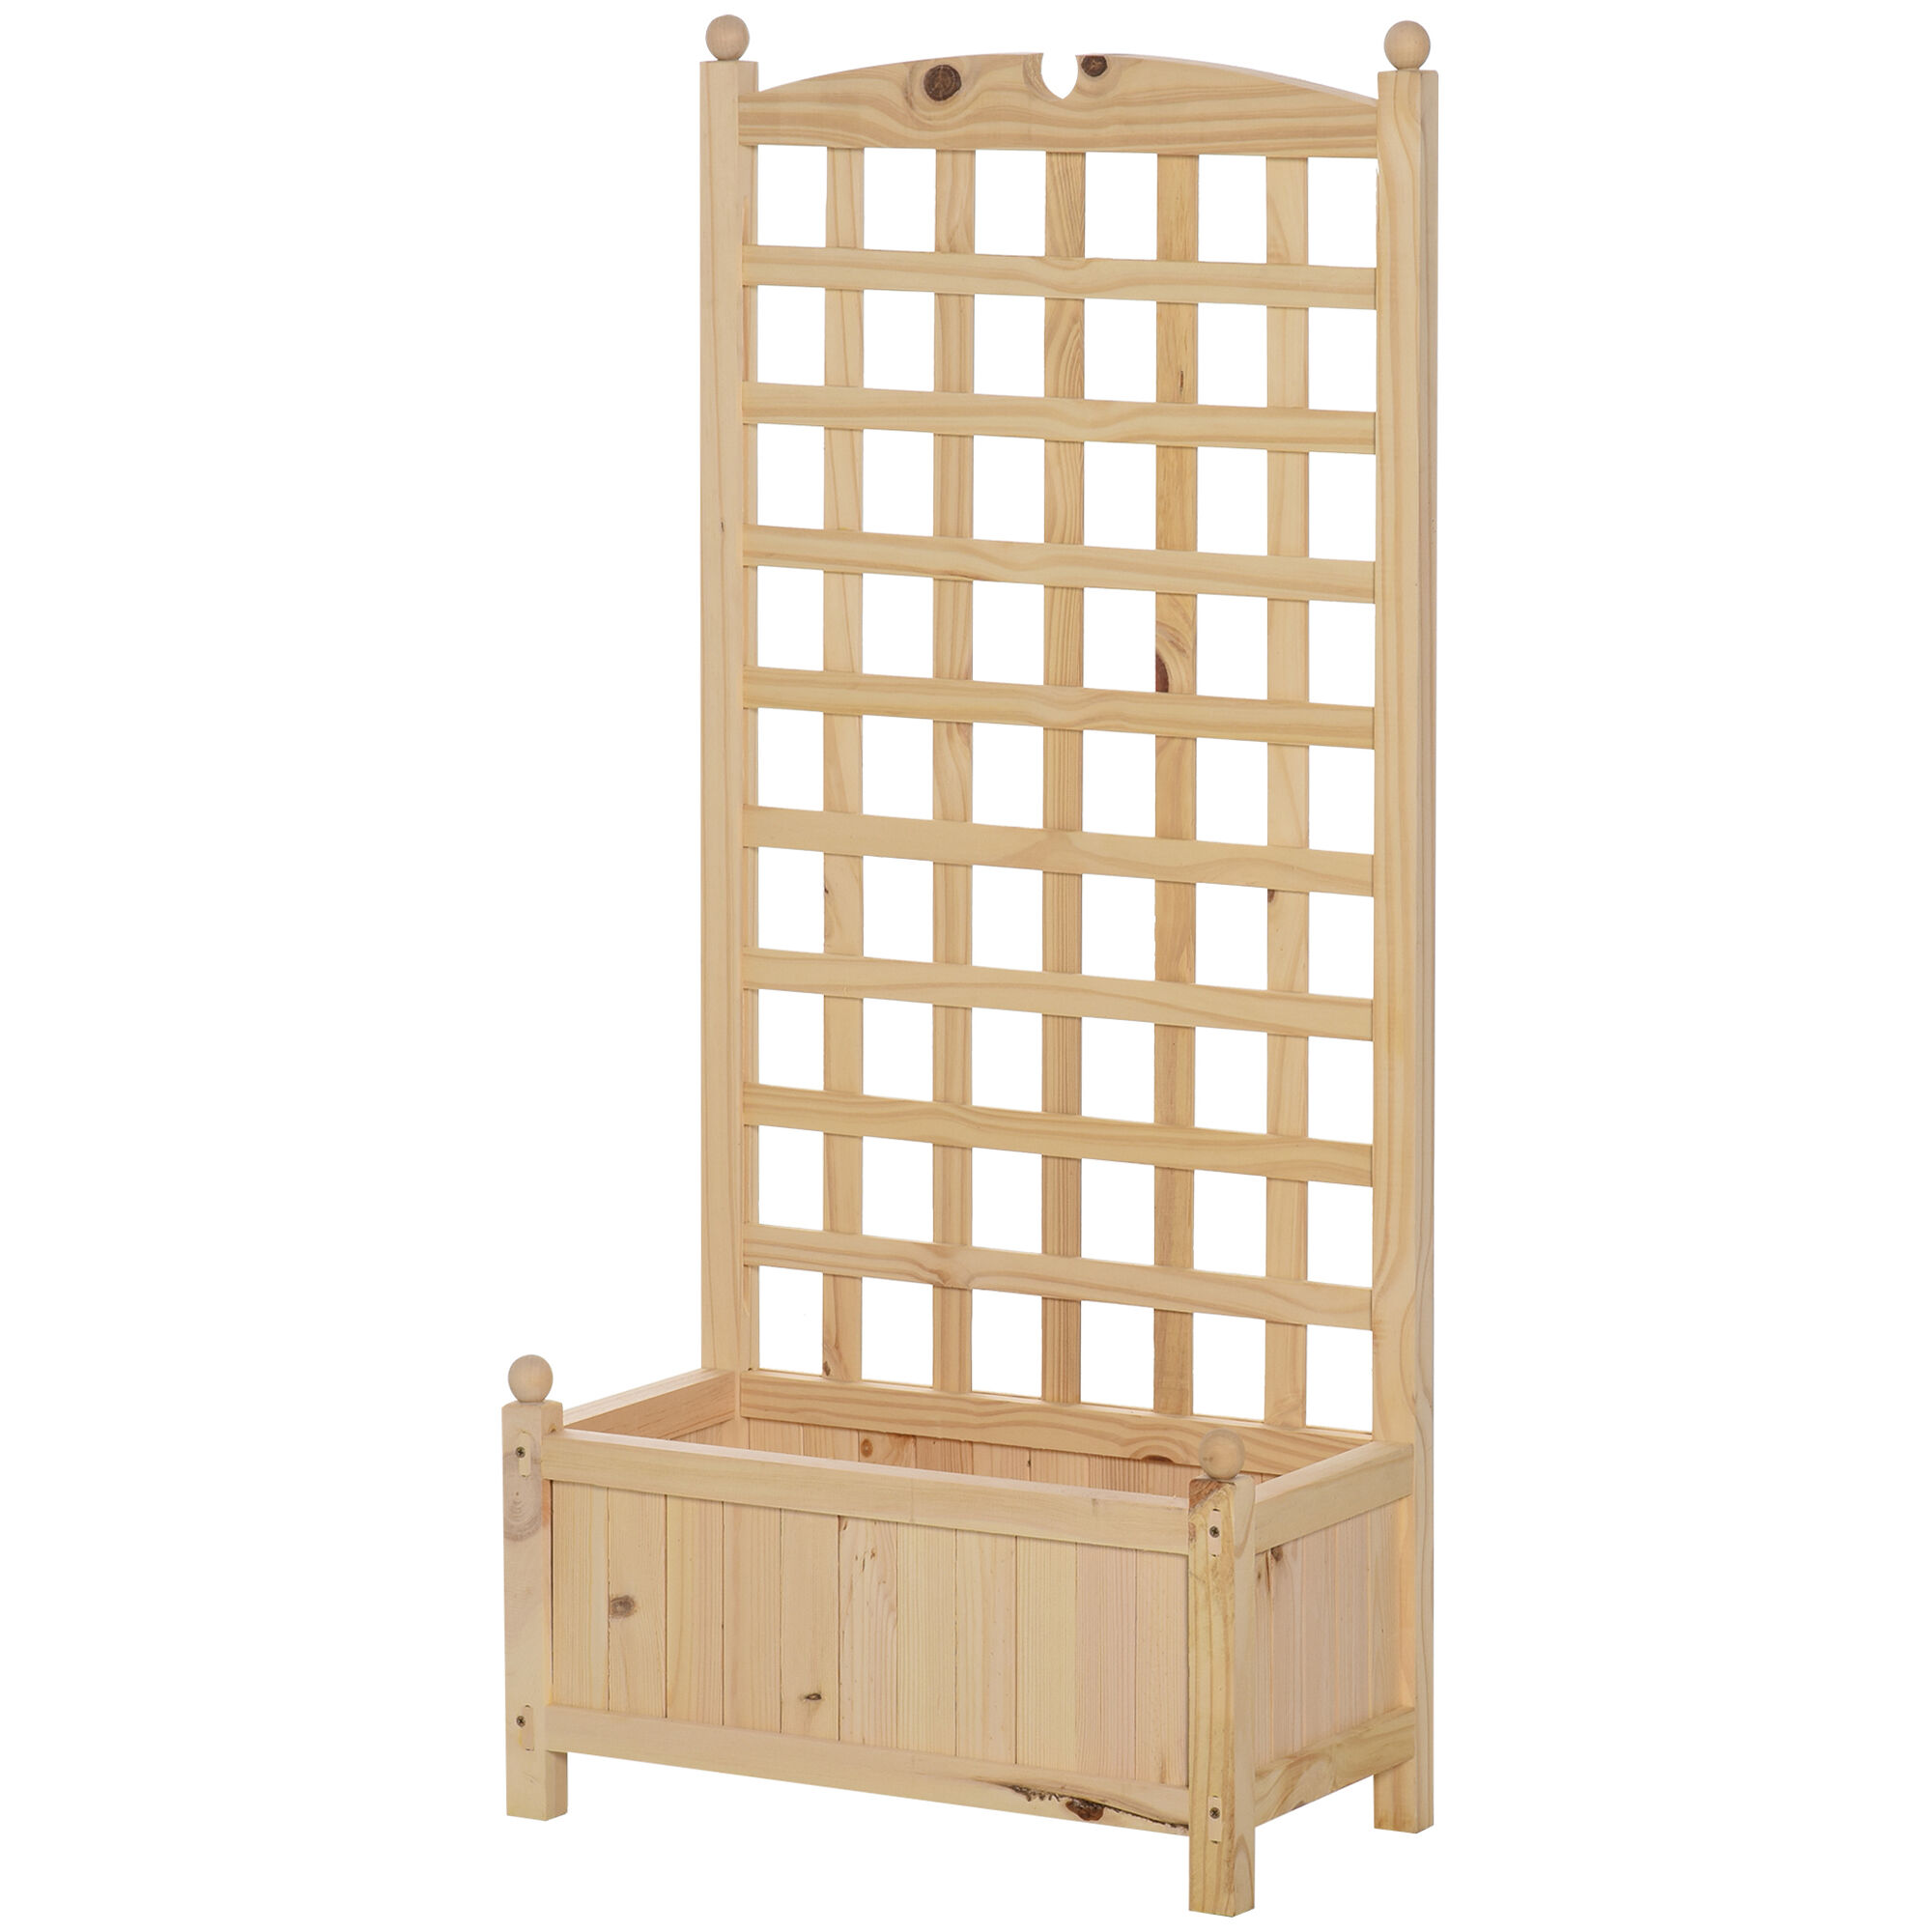 Outsunny Garden Trellis Raised Bed 23.5x11.5x49.25 for Outdoor Indoor Plants Natural   Aosom.com